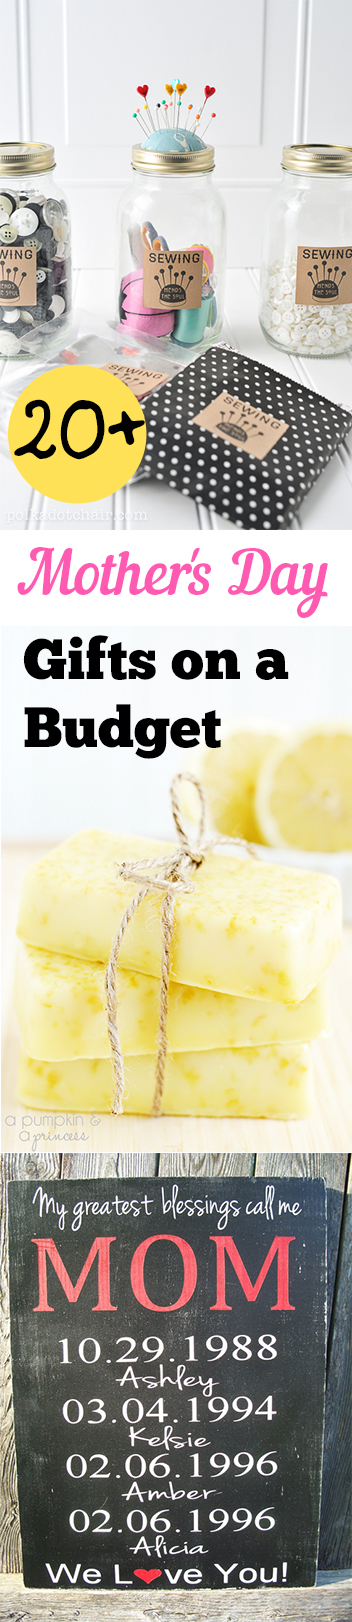 20+ Mother's Day Gifts on a Budget